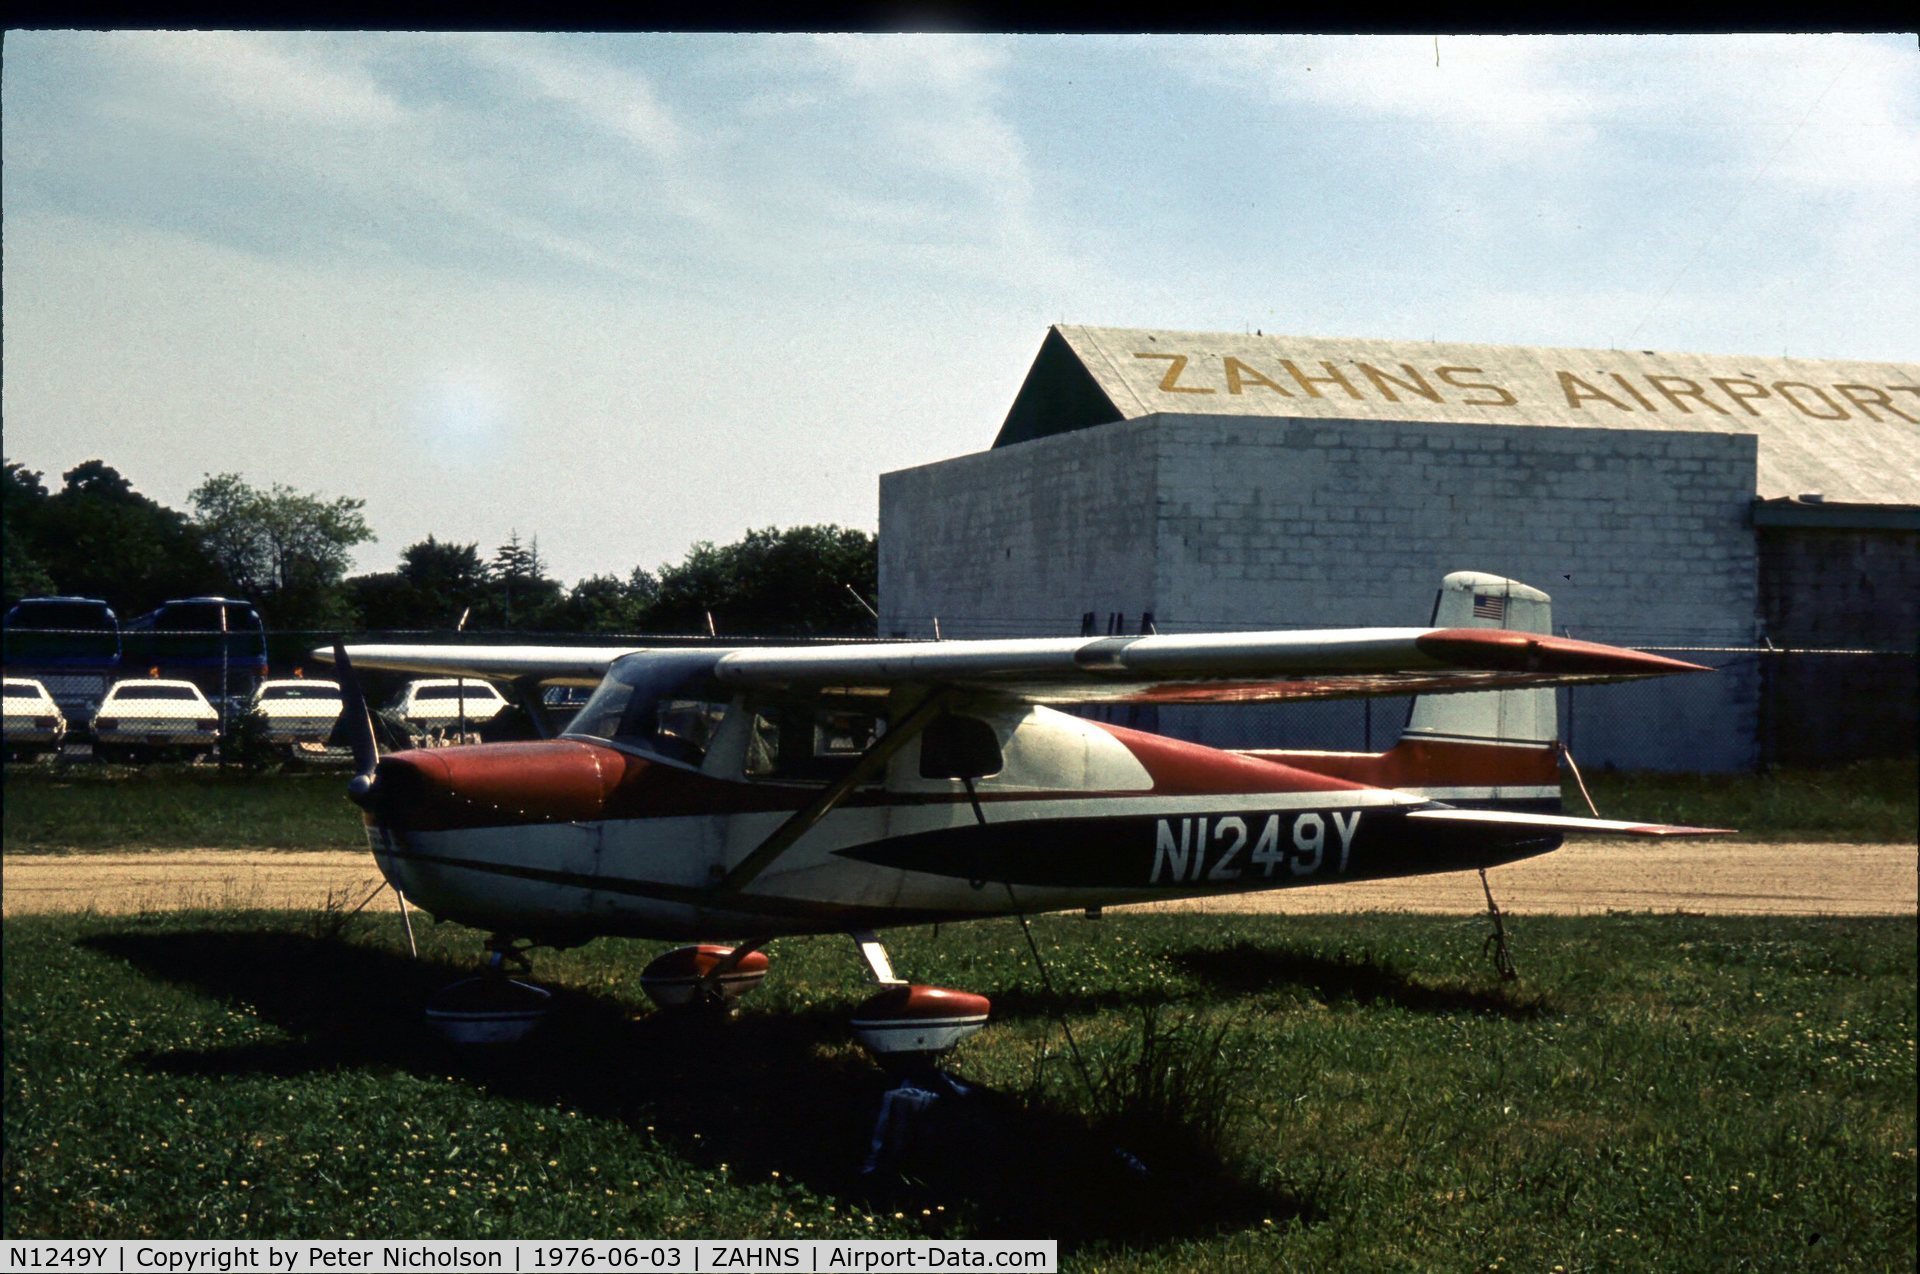 N1249Y, 1962 Cessna 150B C/N 15059649, Based at Zahns Airport, Amityville, Long Island in 1975/76 - airport closed in 1980